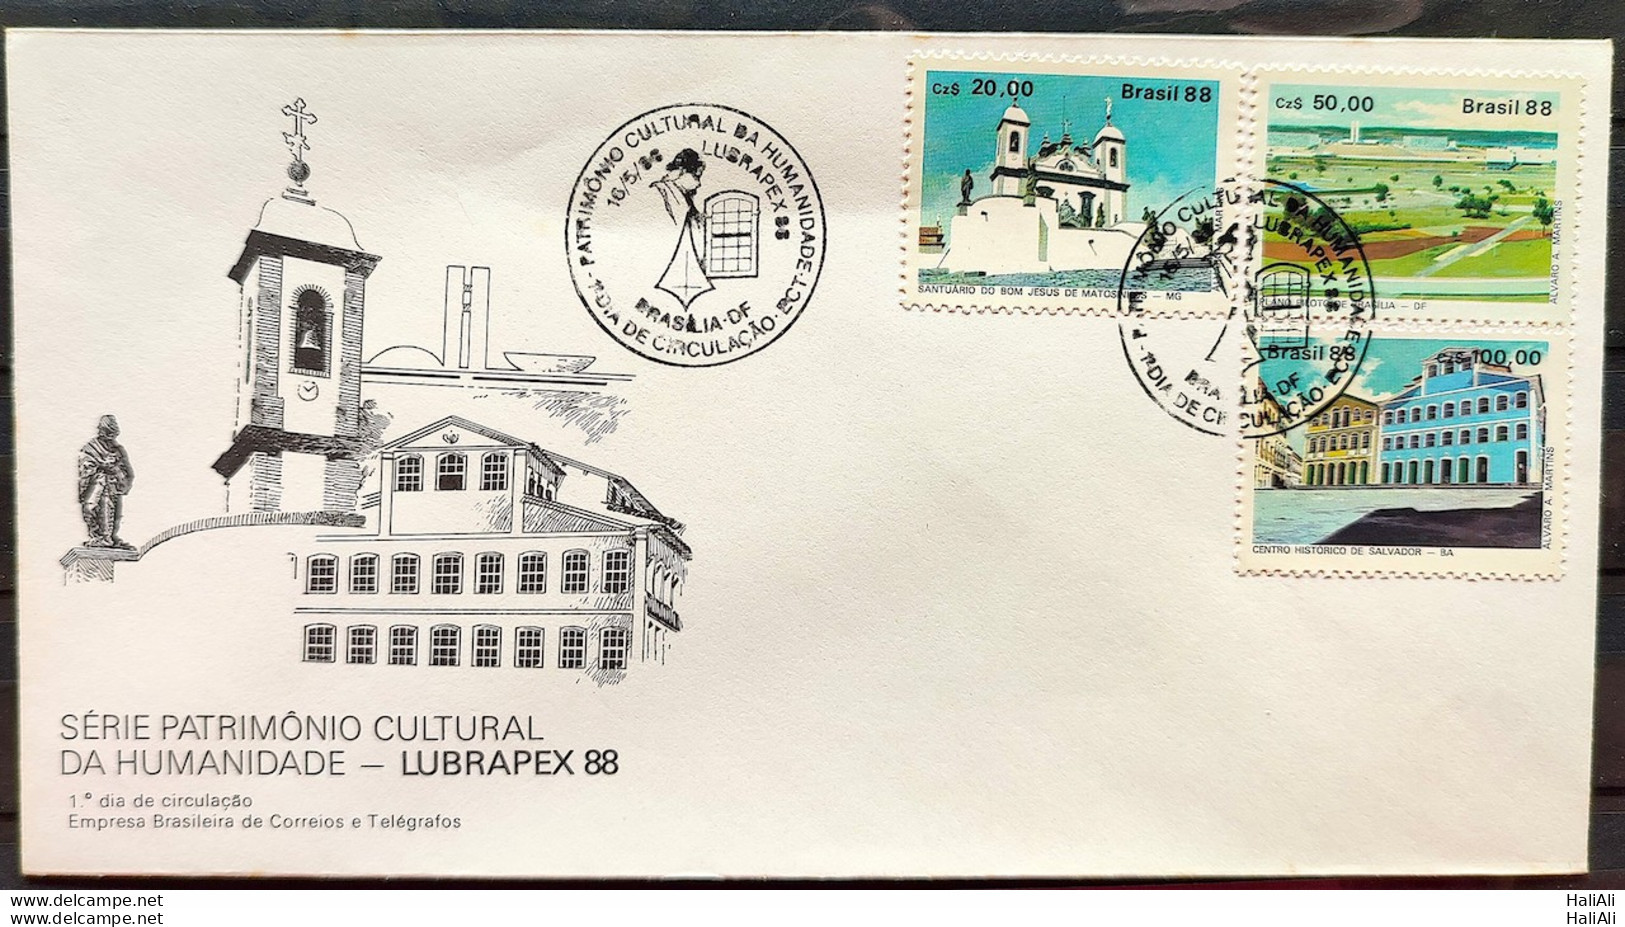 Brazil Envelope FDC 445 1988 Cultural Heritage Of Humanity CBC DF - FDC